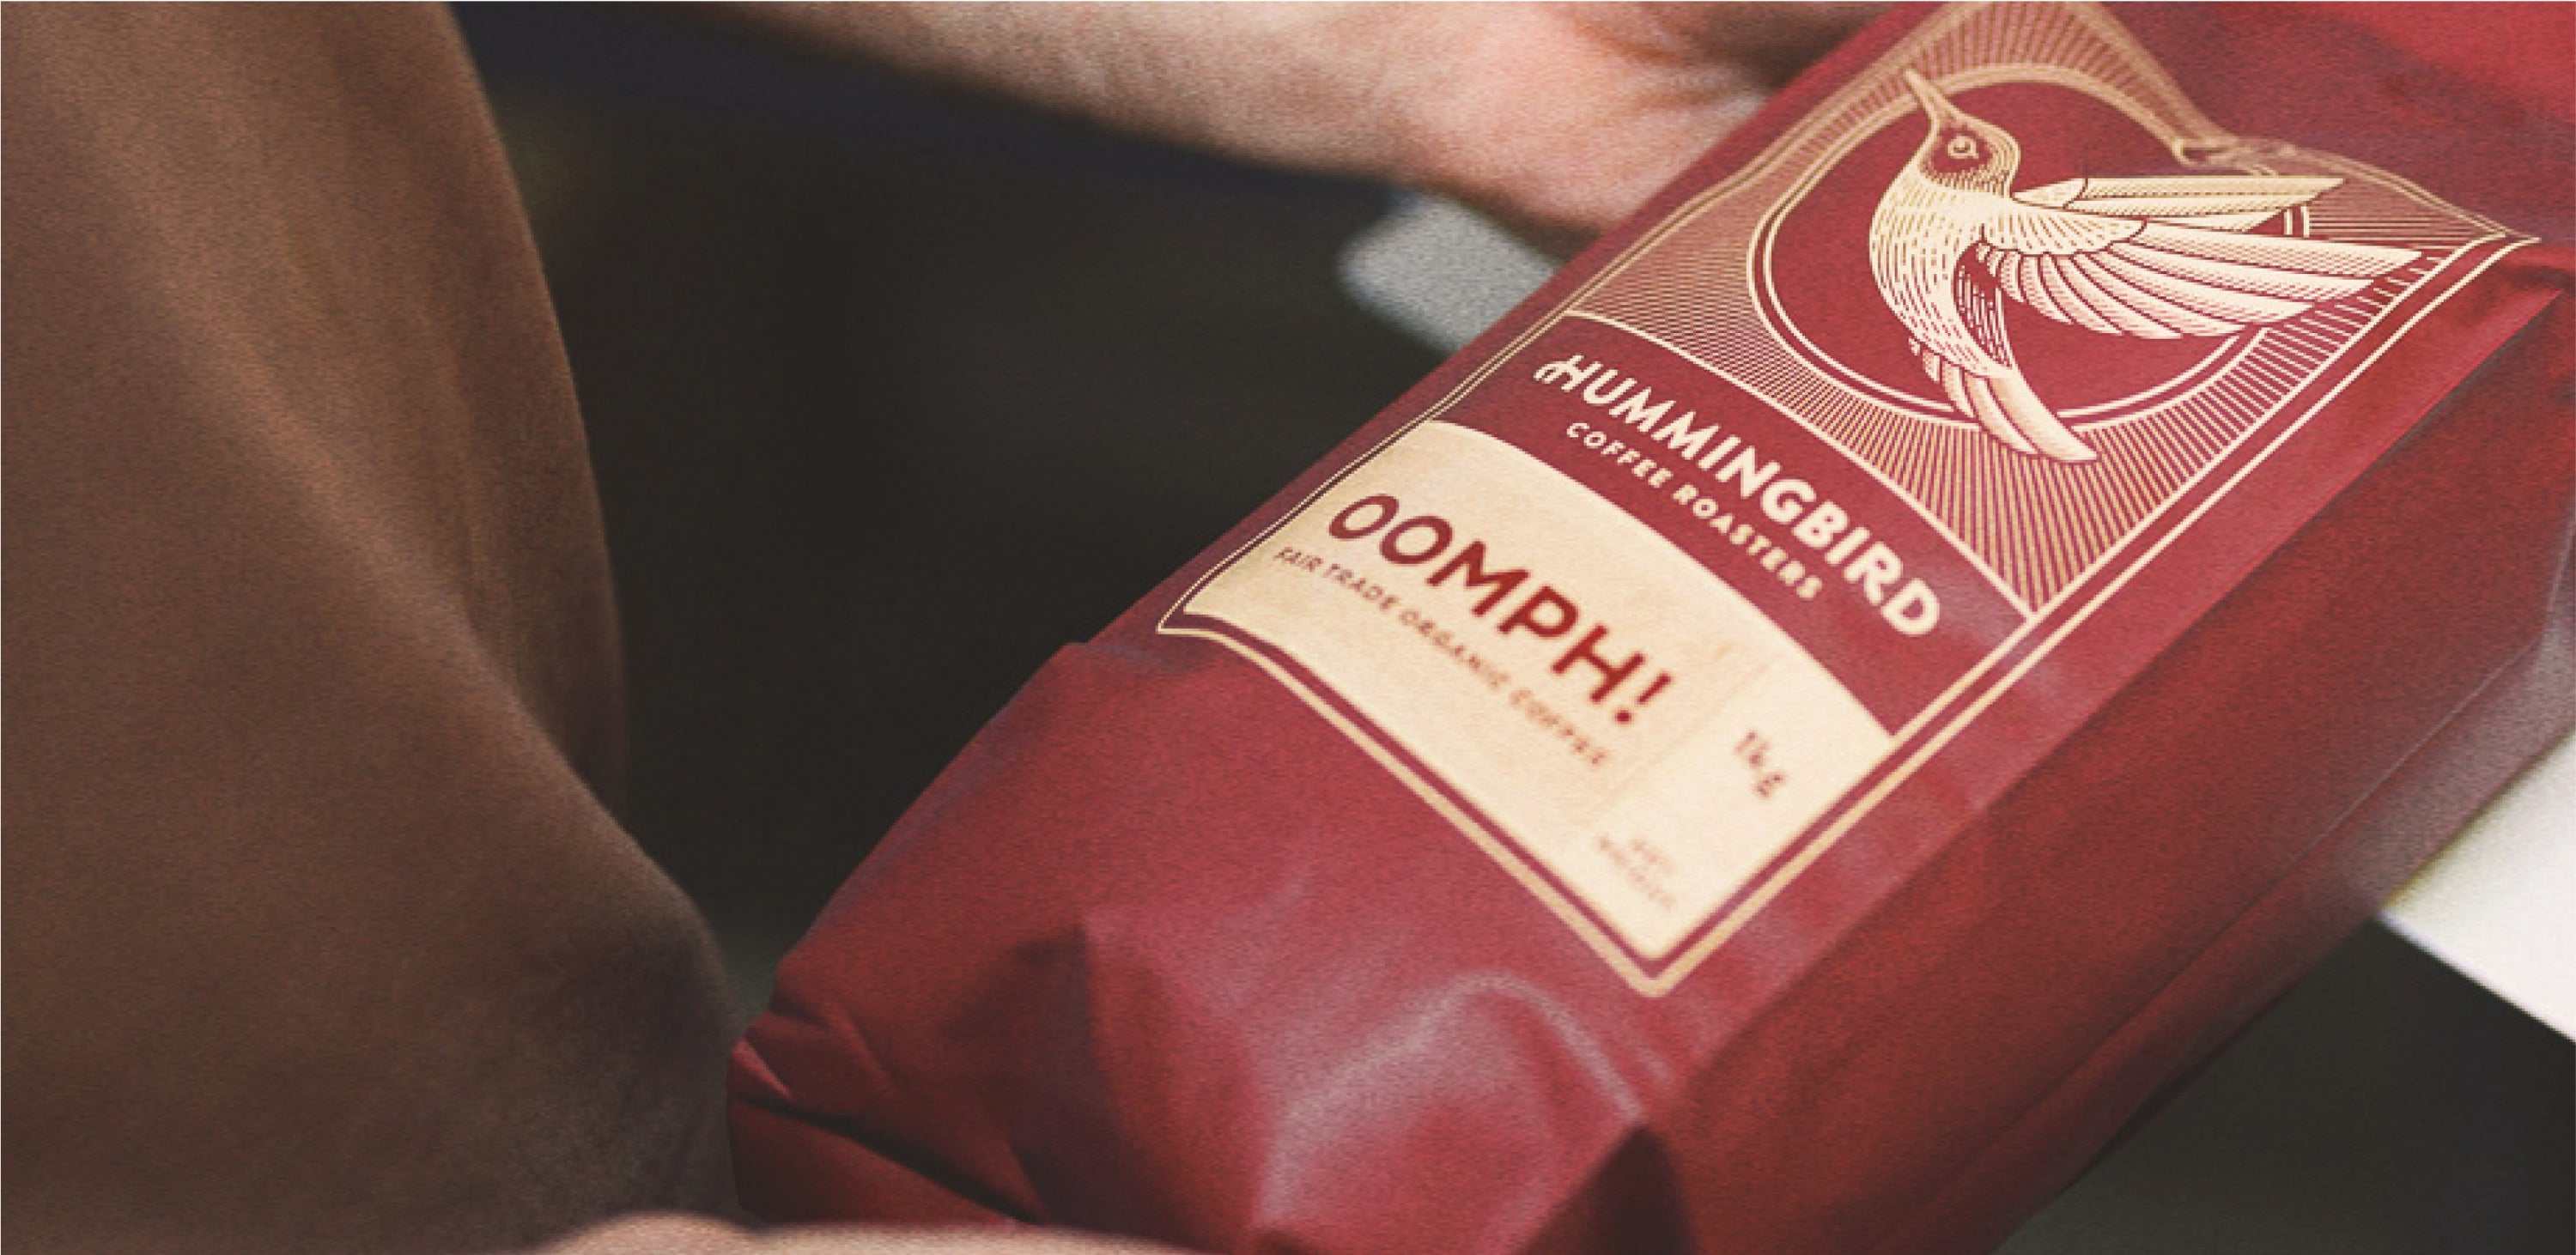 A photo of hands holding a red bag of Oomph Hummingbird Coffee